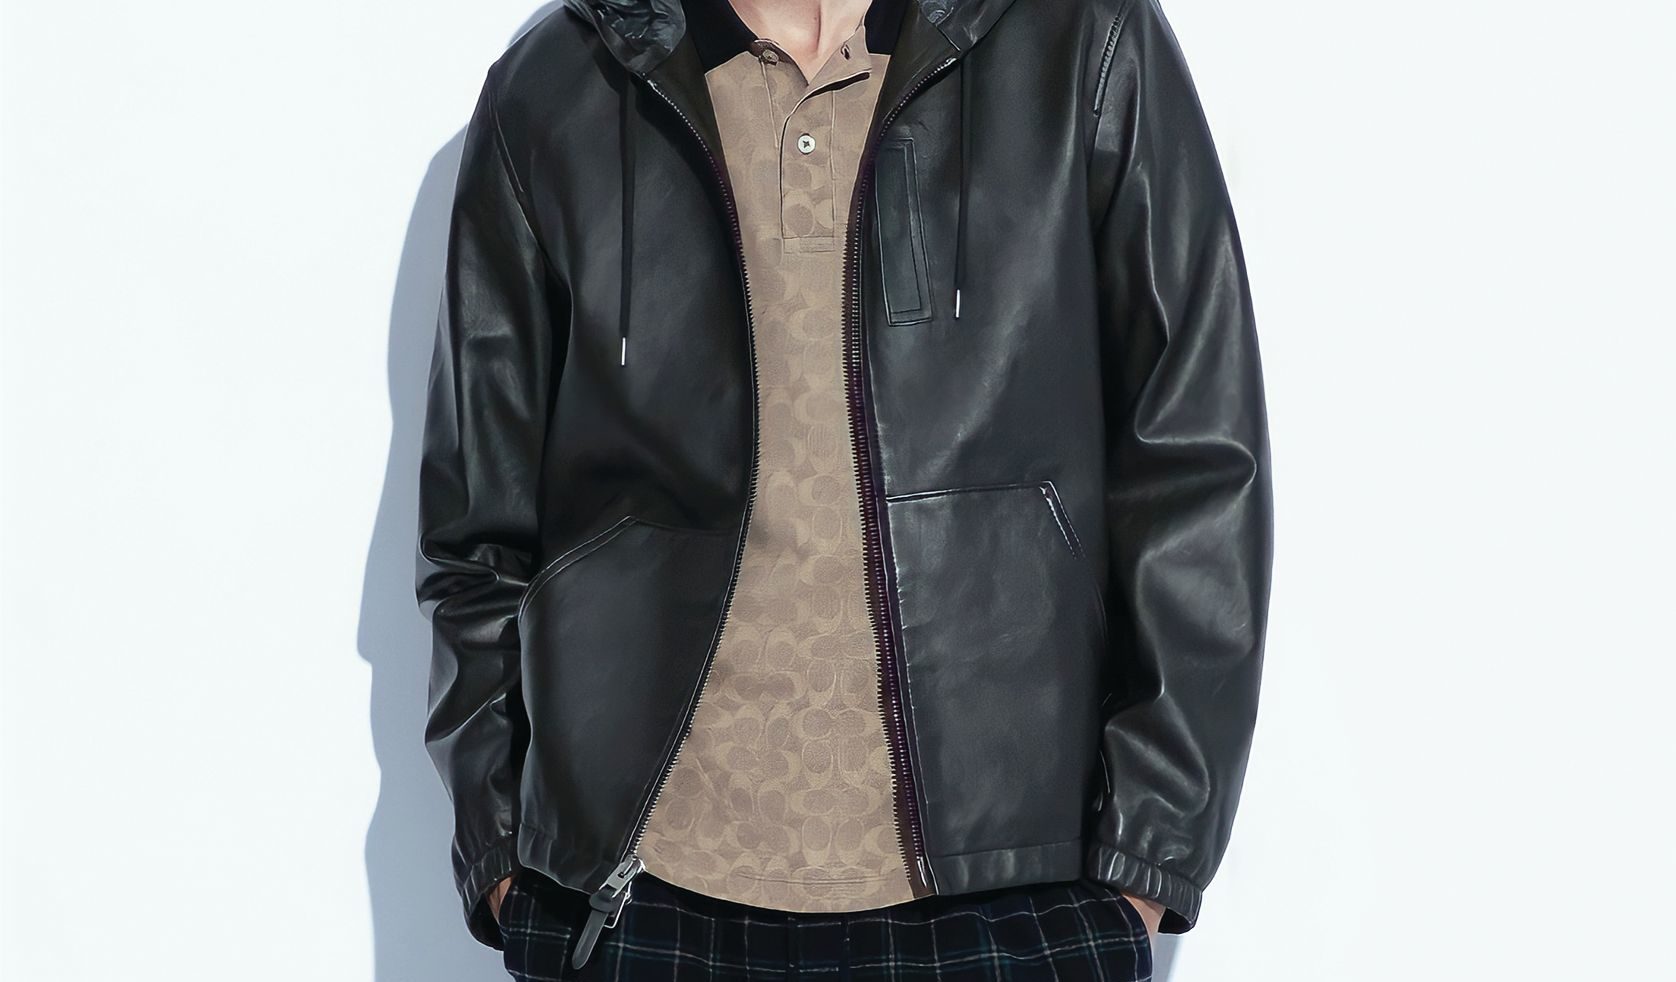 Leather jackets that provide cool vibes in any weather - Gulfshore